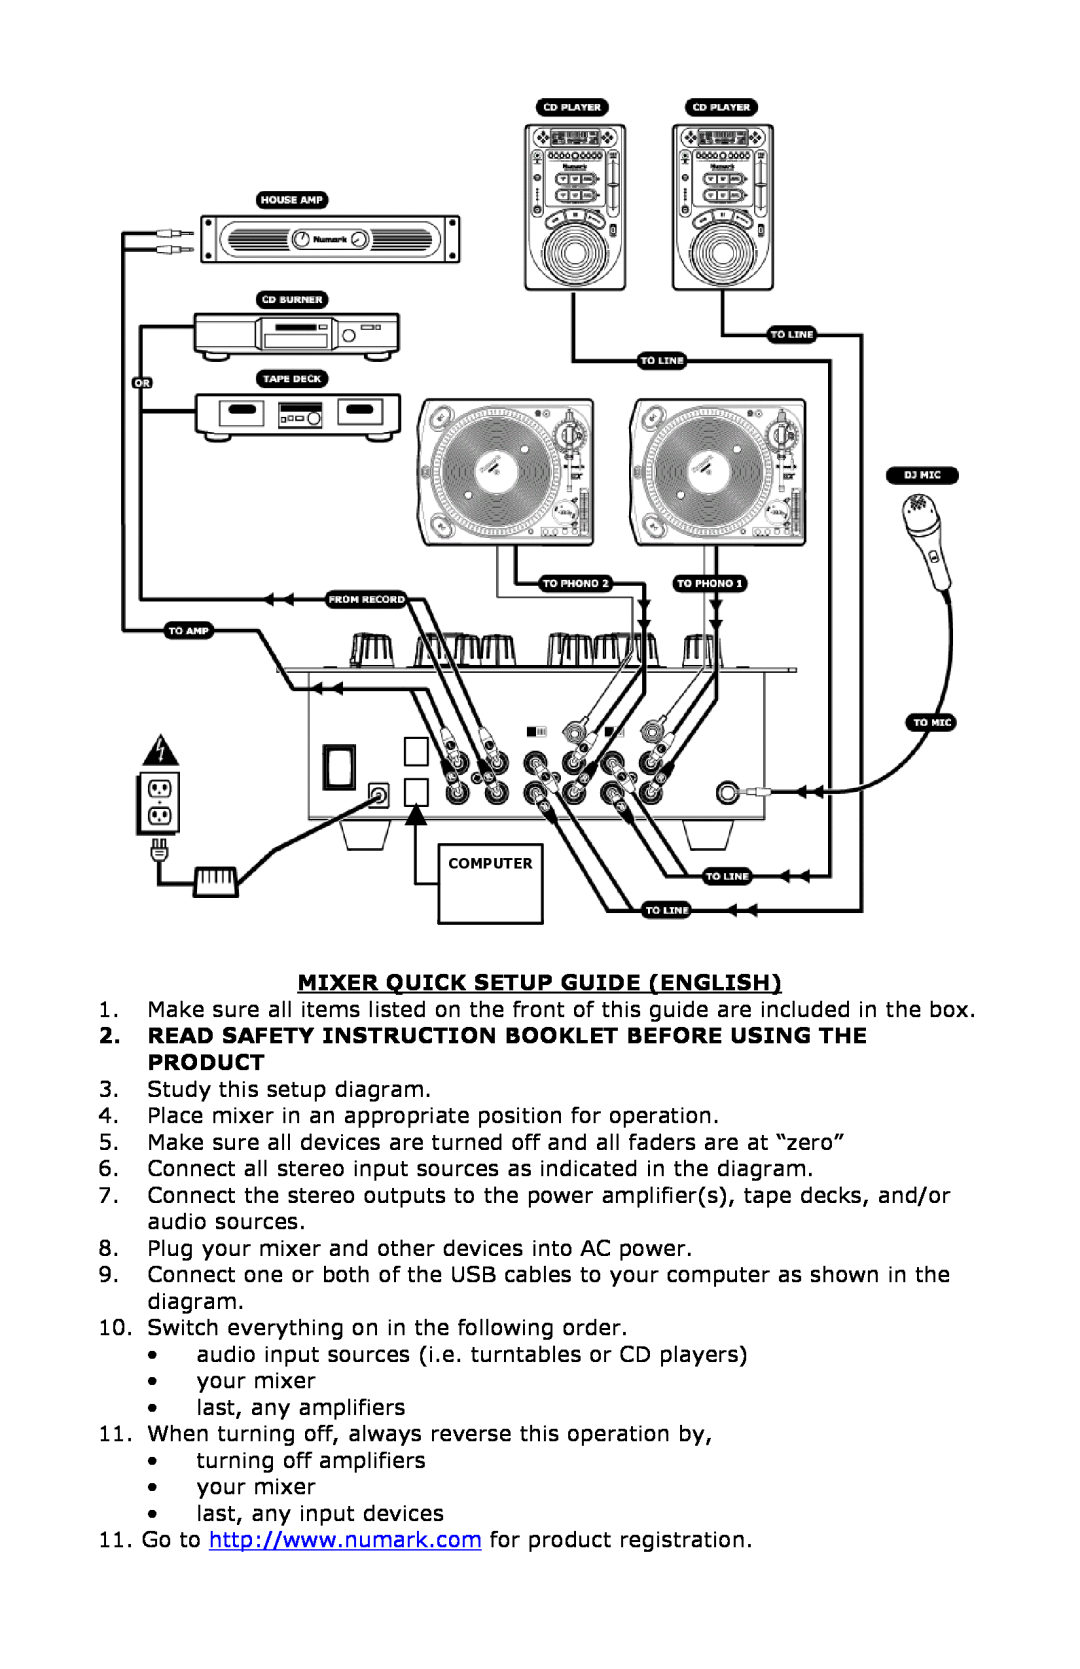 Numark Industries DXM01 Mixer Quick Setup Guide English, Read Safety Instruction Booklet Before Using The Product 